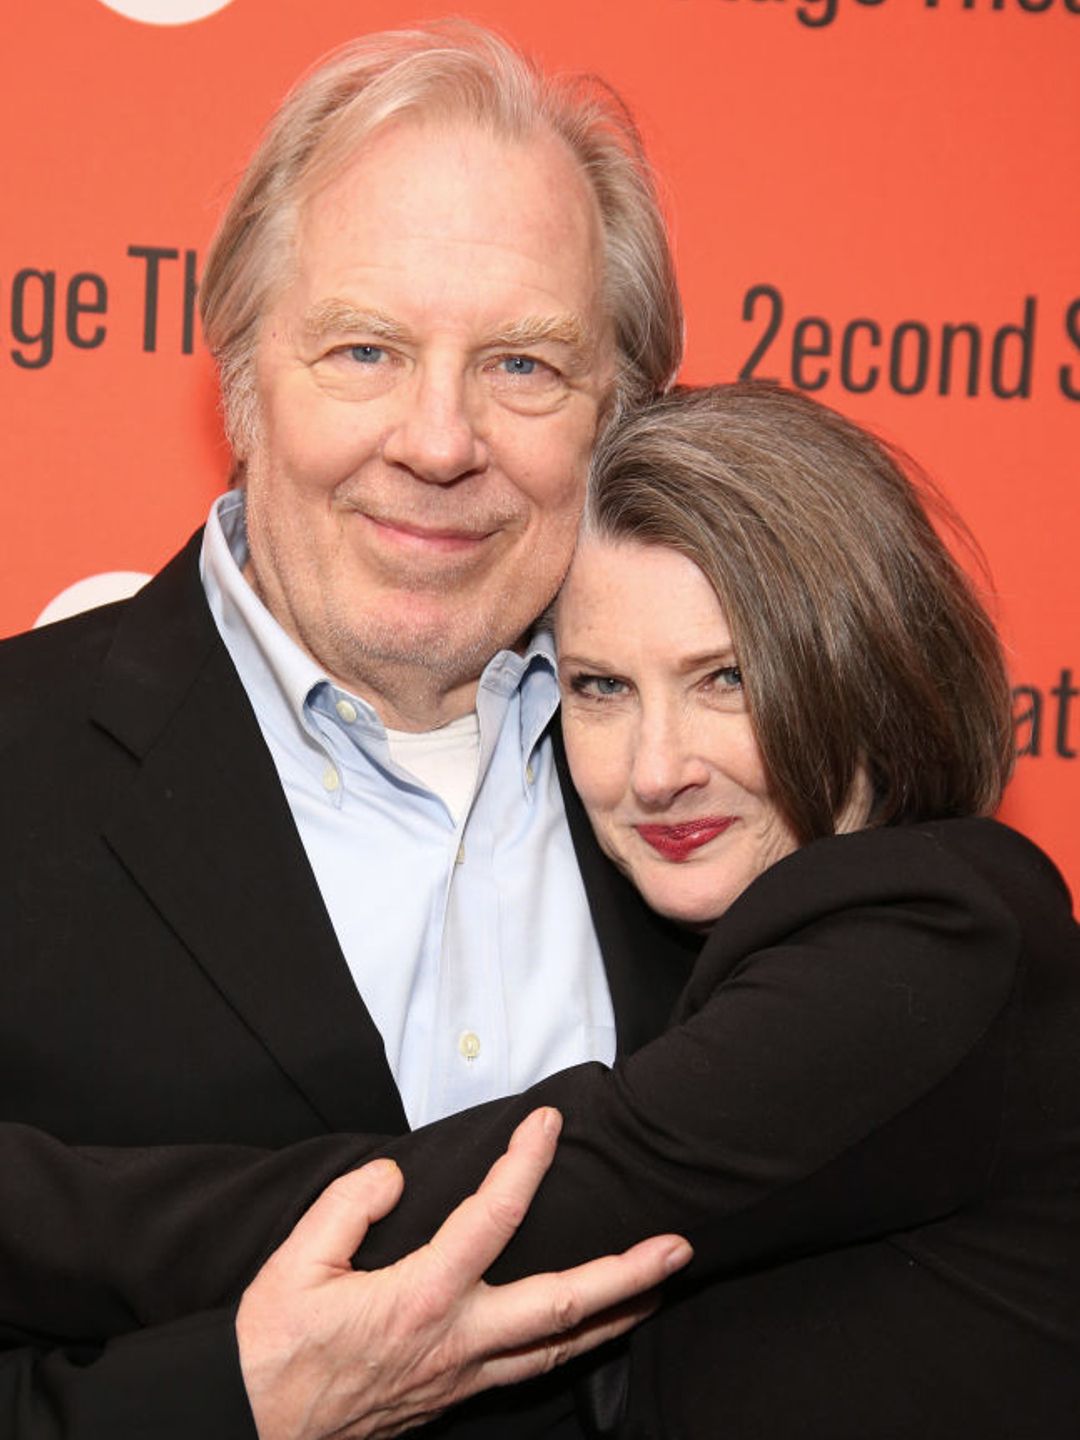 Michael McKean and Annette O'Toole cuddle for a photo